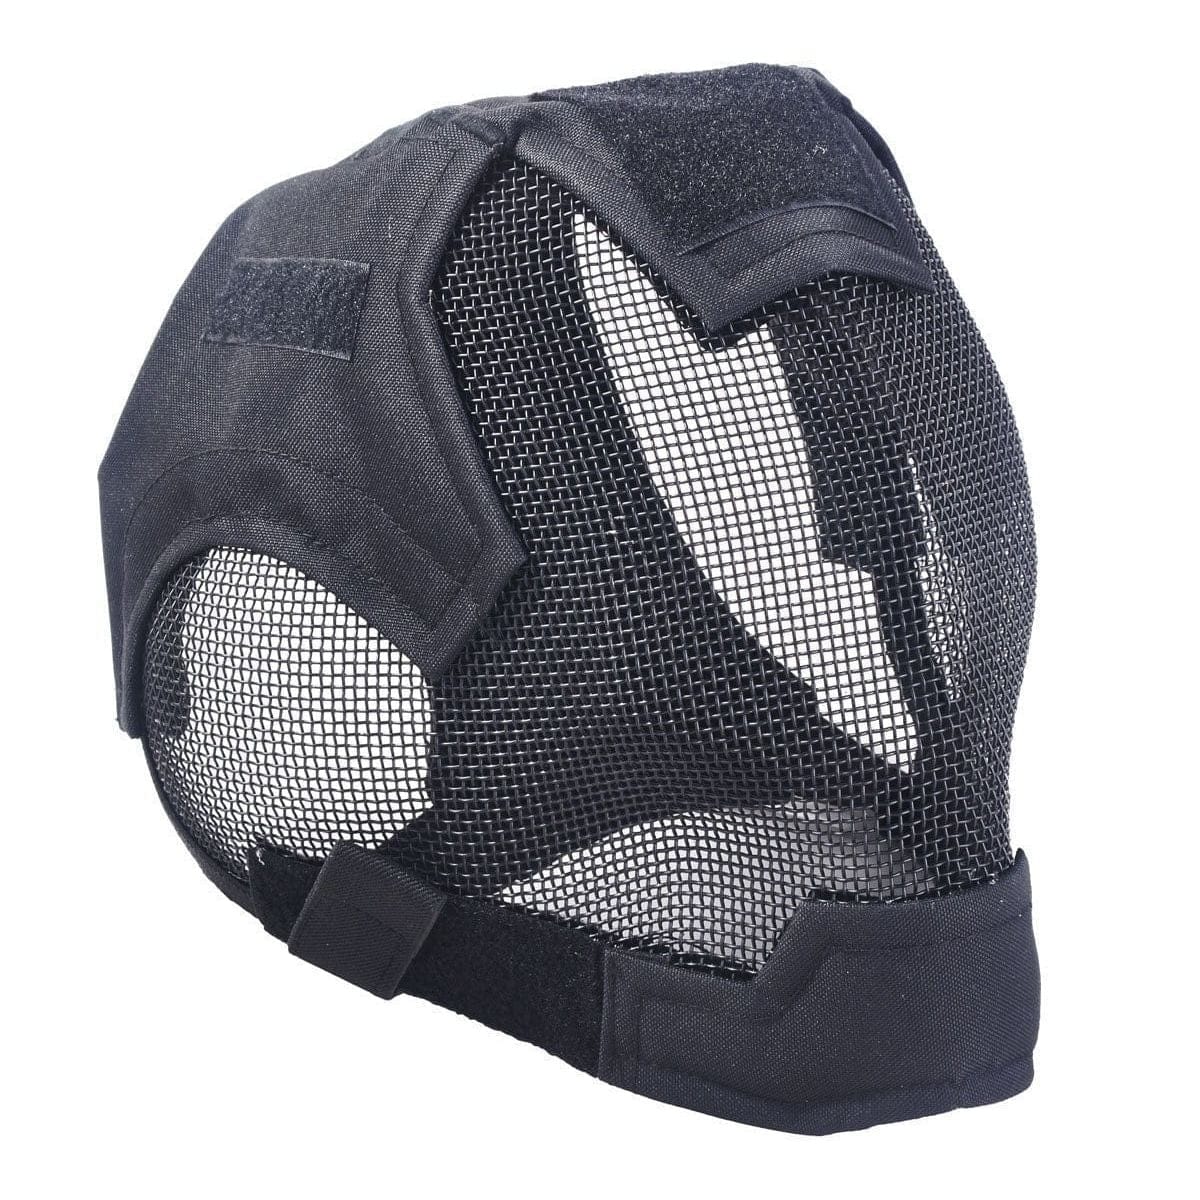 Airsportinggoods TRIMEX AIRSOFT FENCING SAFETY MESH MASK AND EARS PROTECTION BLACK